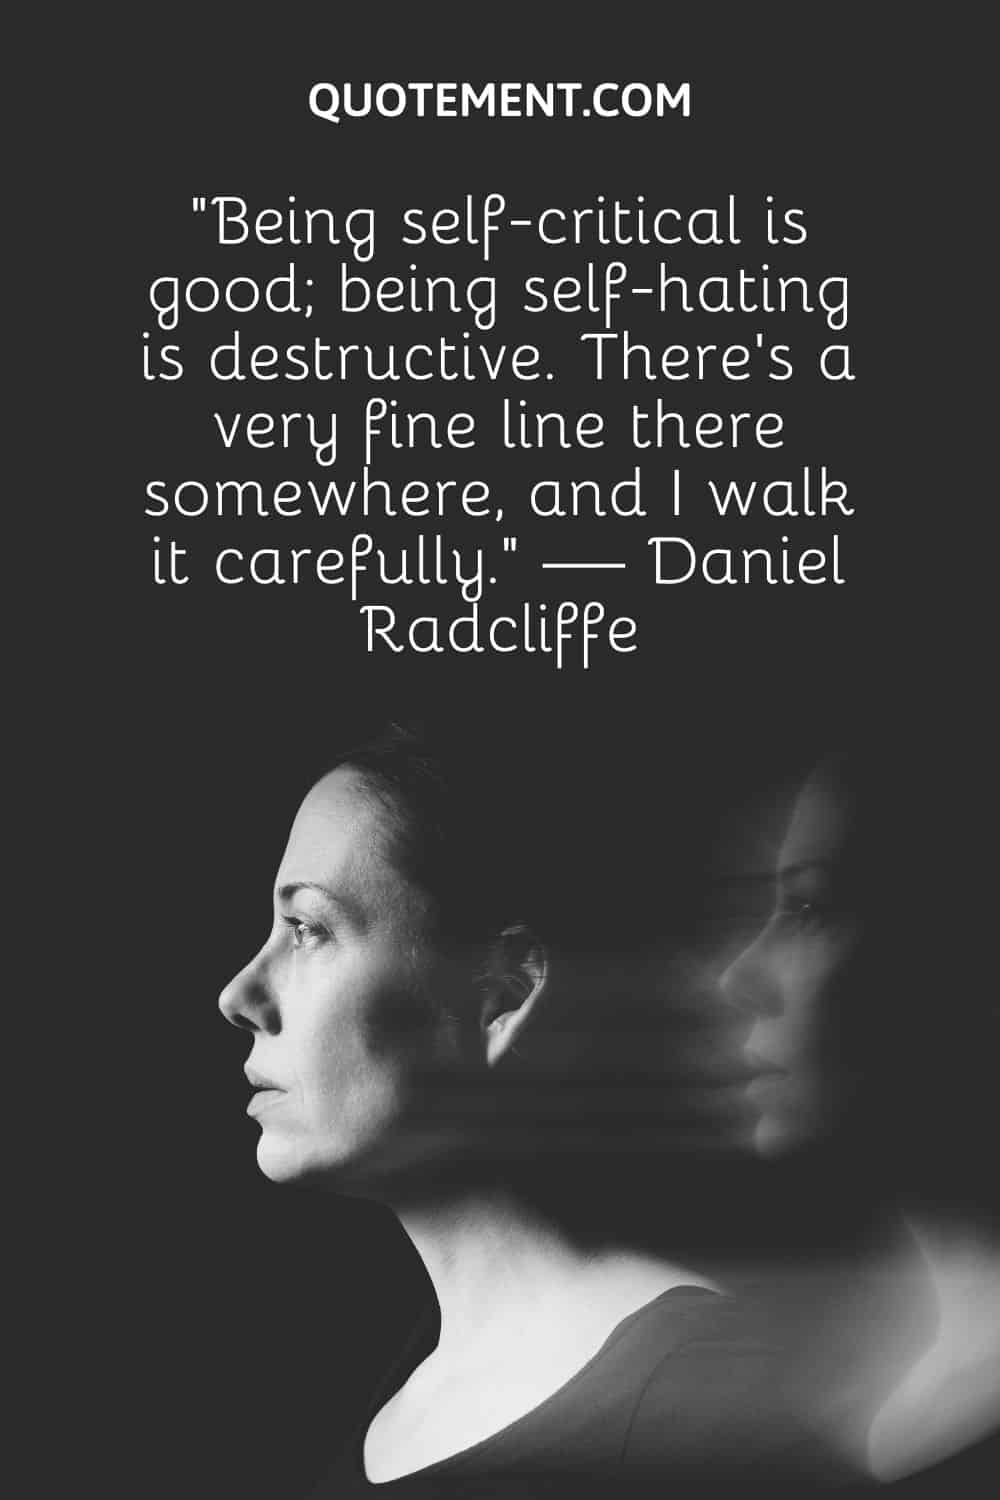 “Being self-critical is good; being self-hating is destructive. There’s a very fine line there somewhere,  and I walk it carefully.” — Daniel Radcliffe